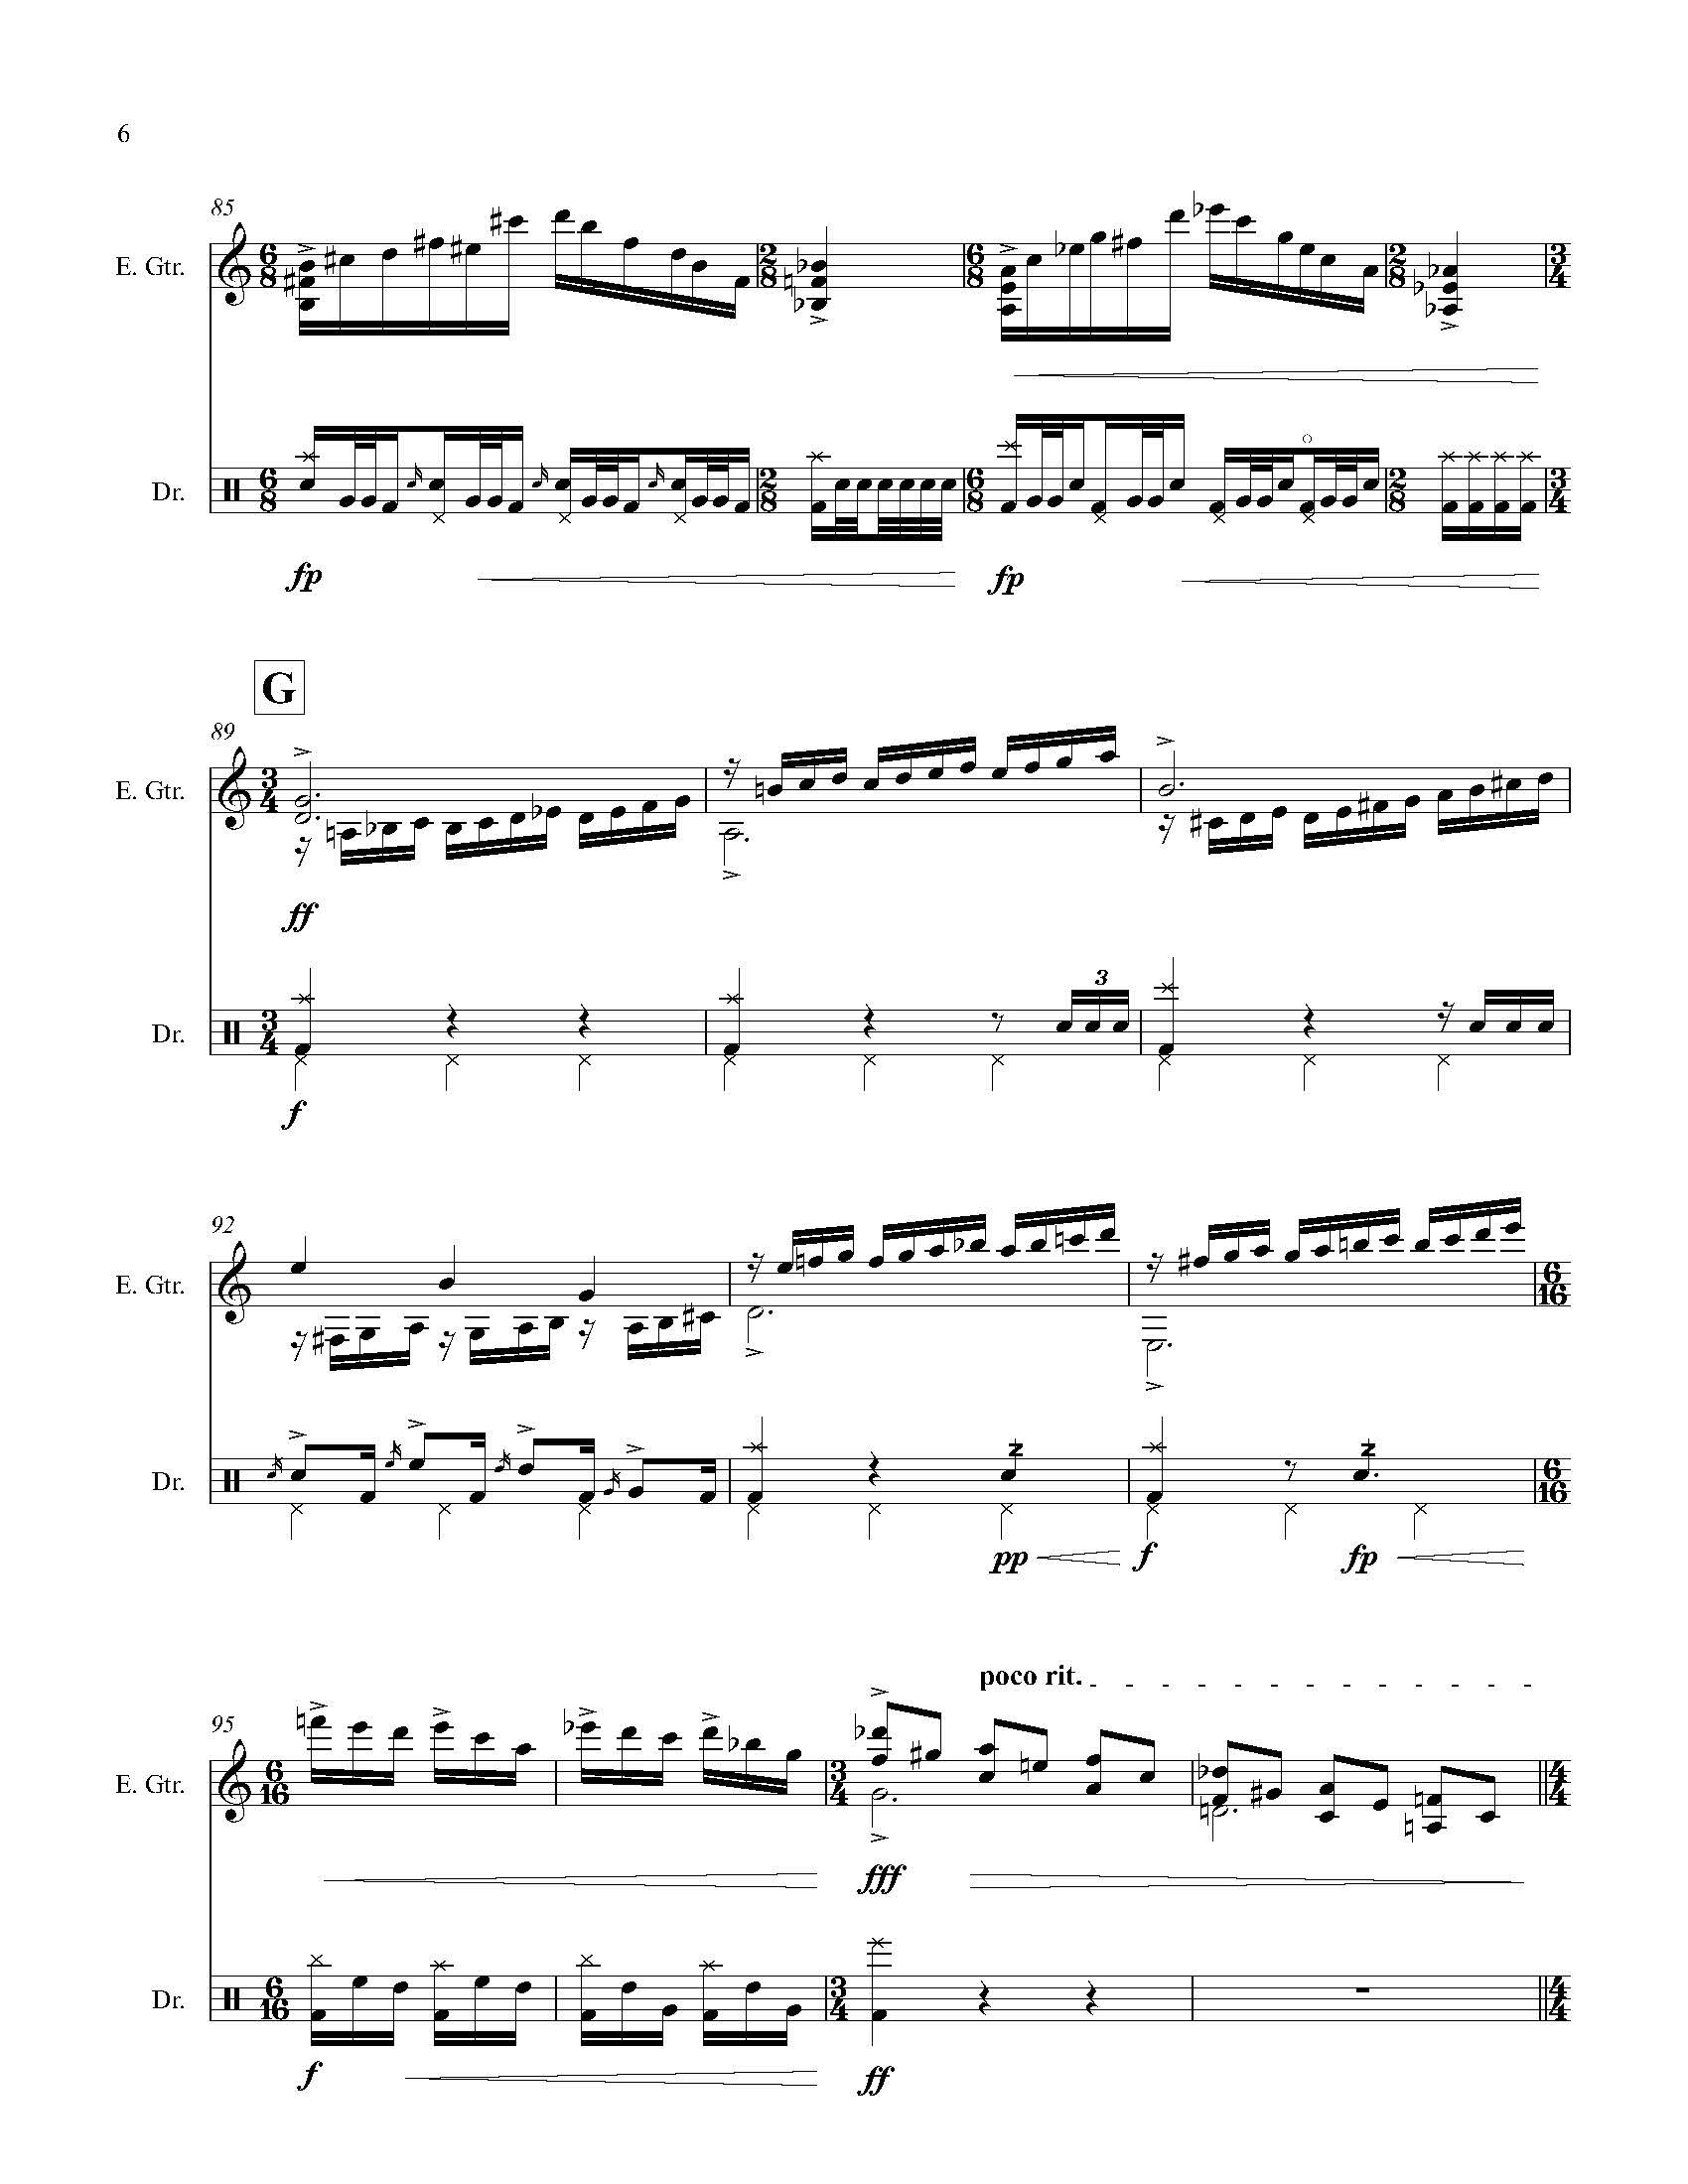 Atoms - Complete Score_Page_12.jpg